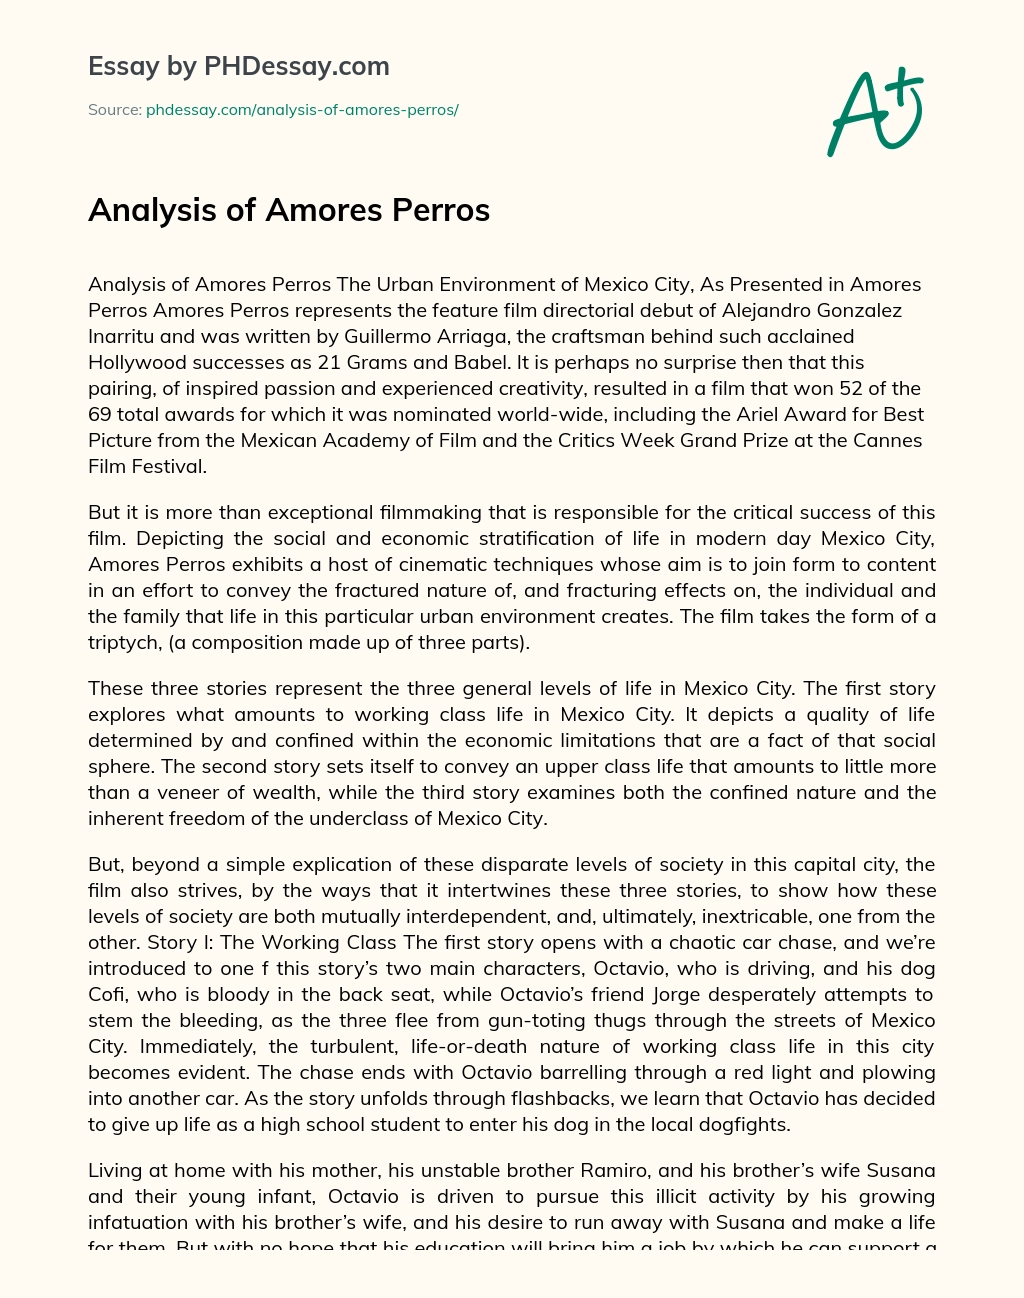 Analysis of Amores Perros essay